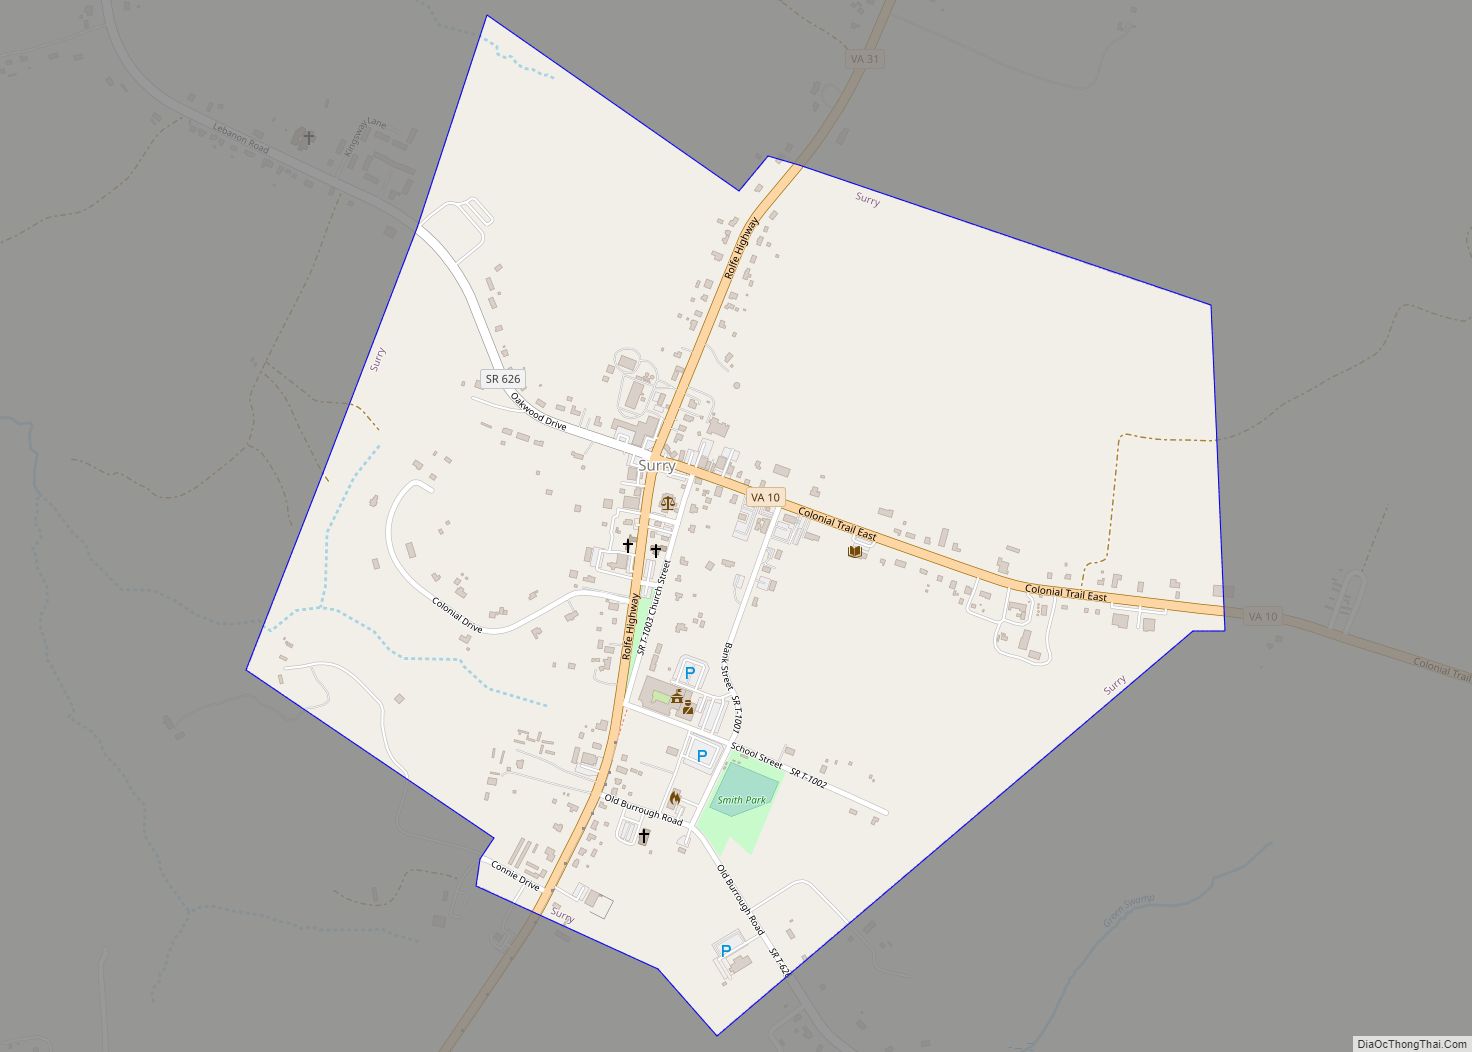 Map of Surry town